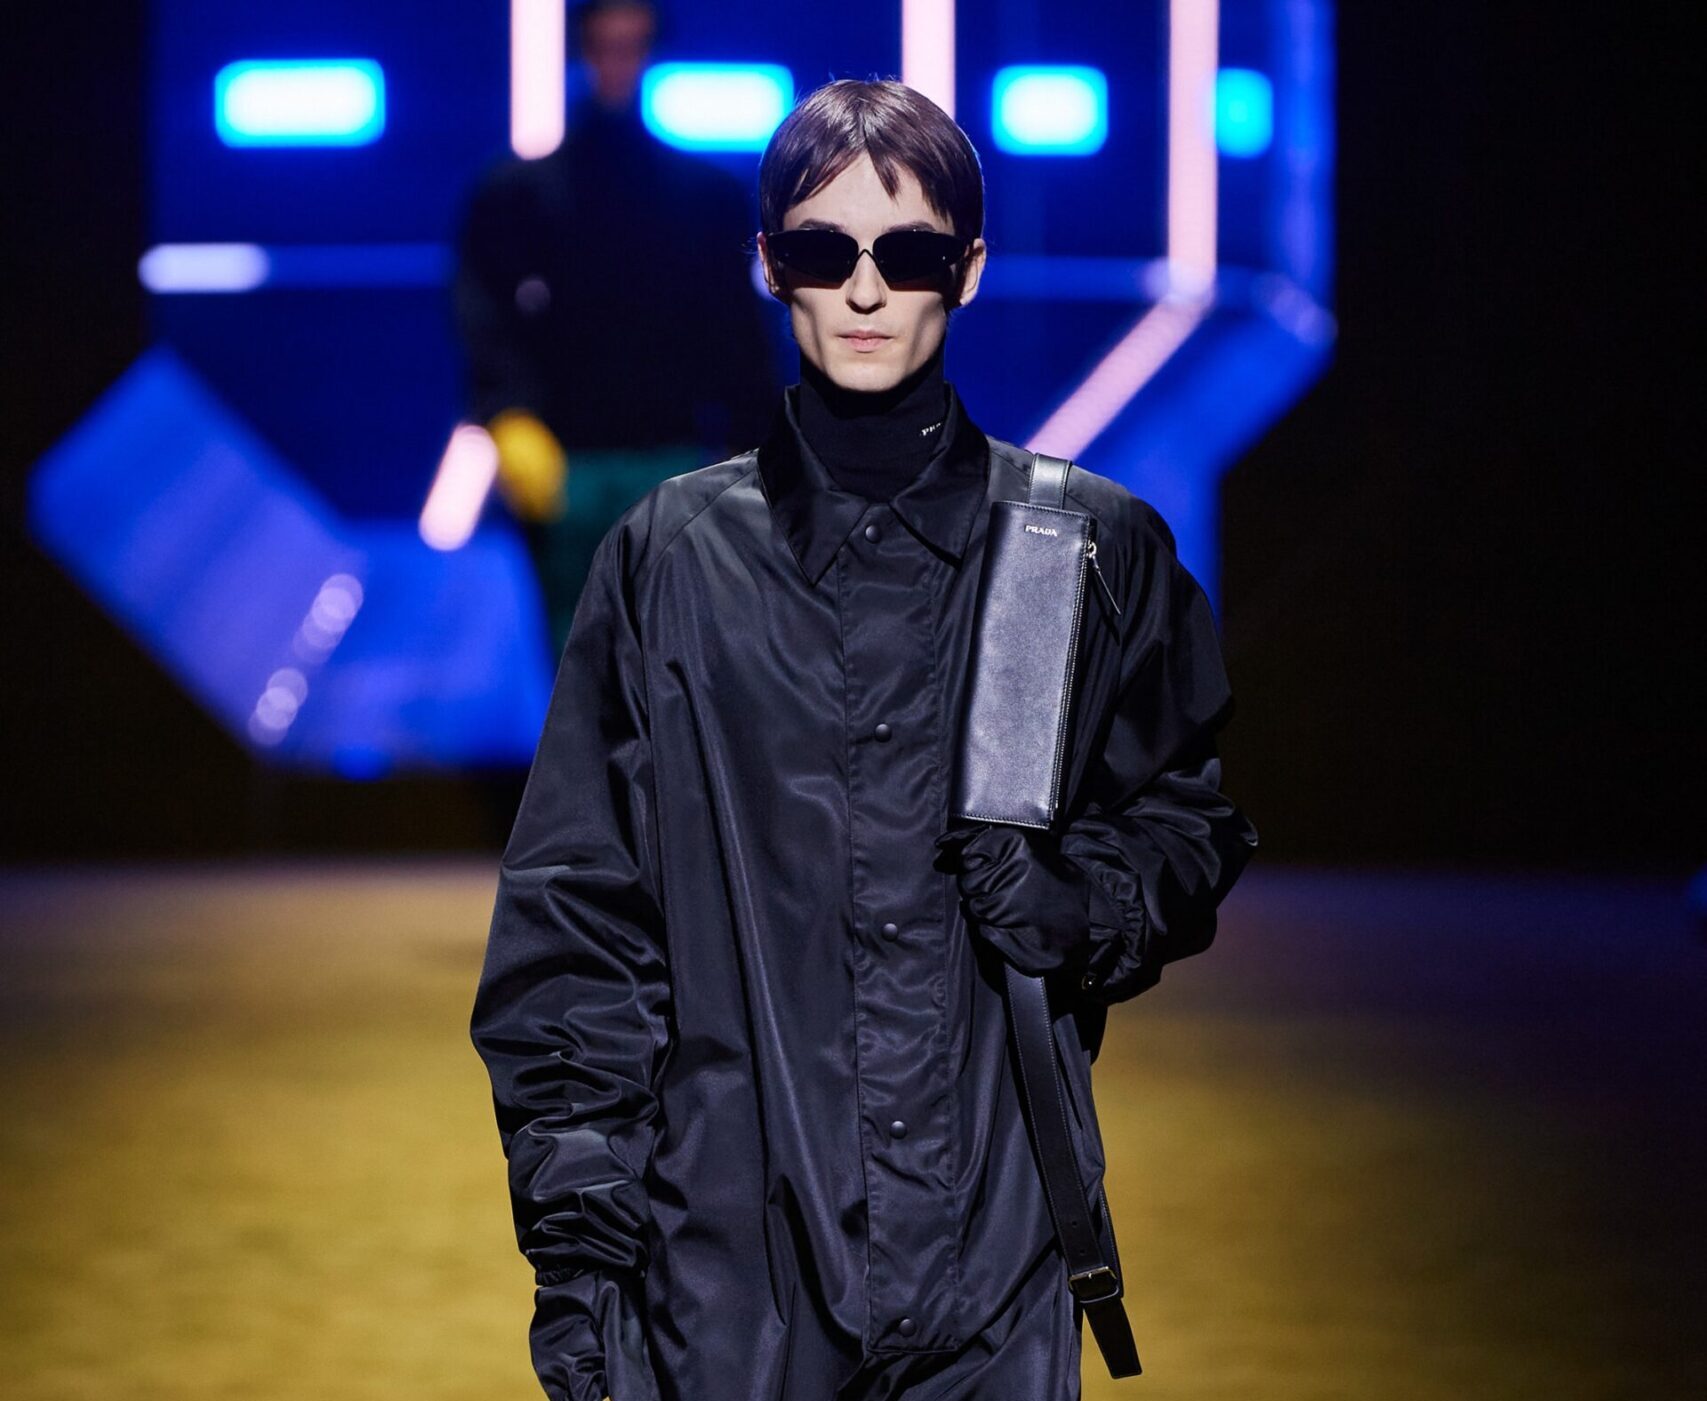 The Prada FW22 Show Reminds Us That Work and Purpose Come Hand in Hand.